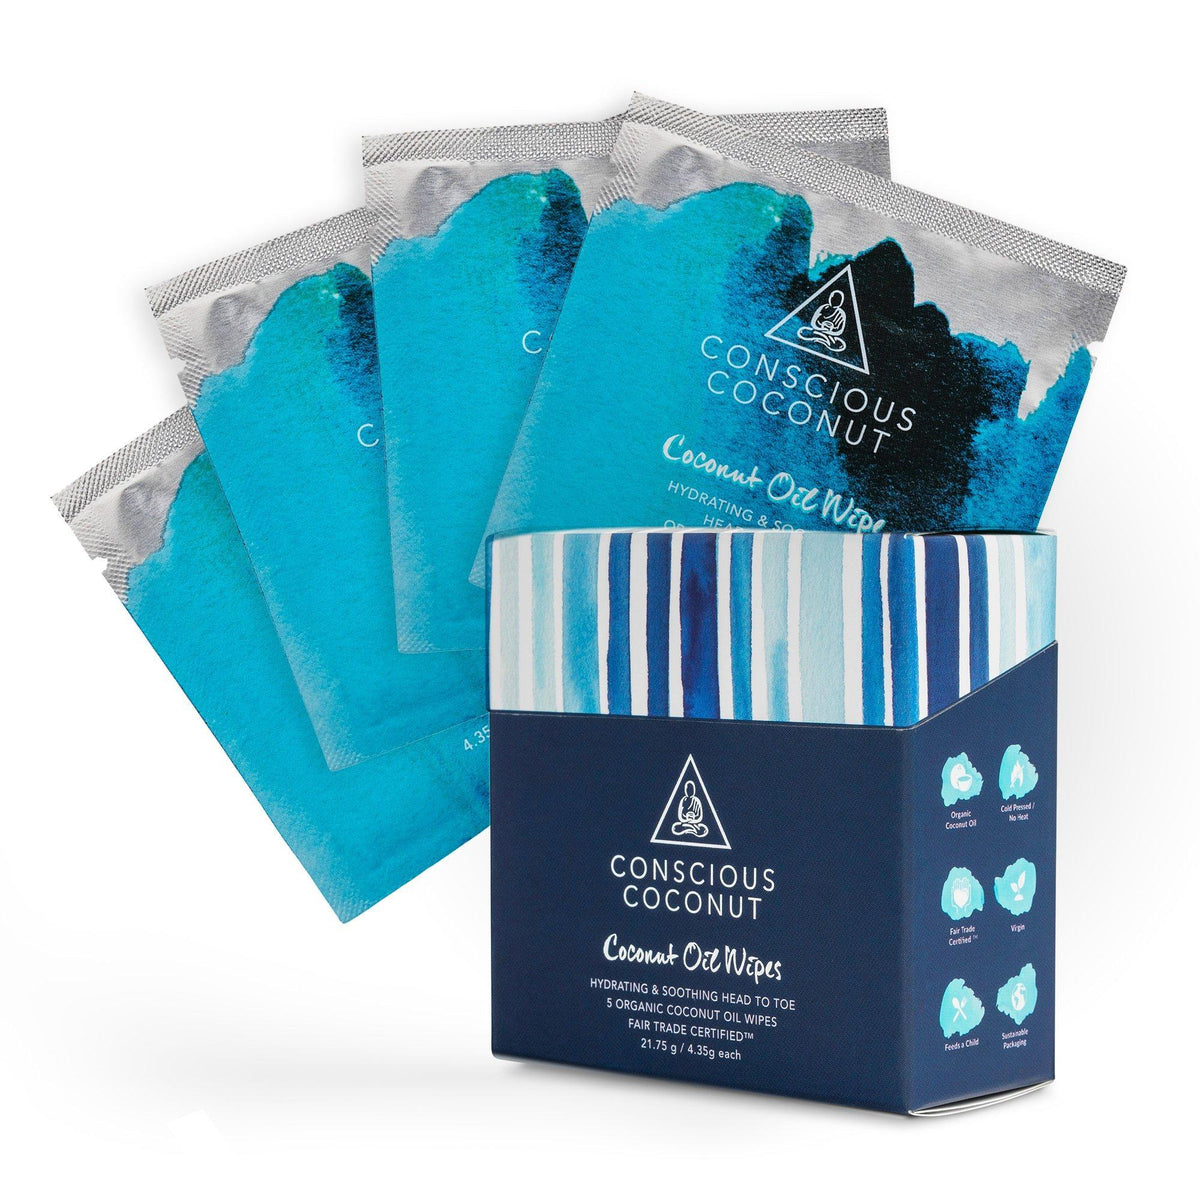 Conscious Coconut Coconut Oil Wipes (5 Travel Pack)